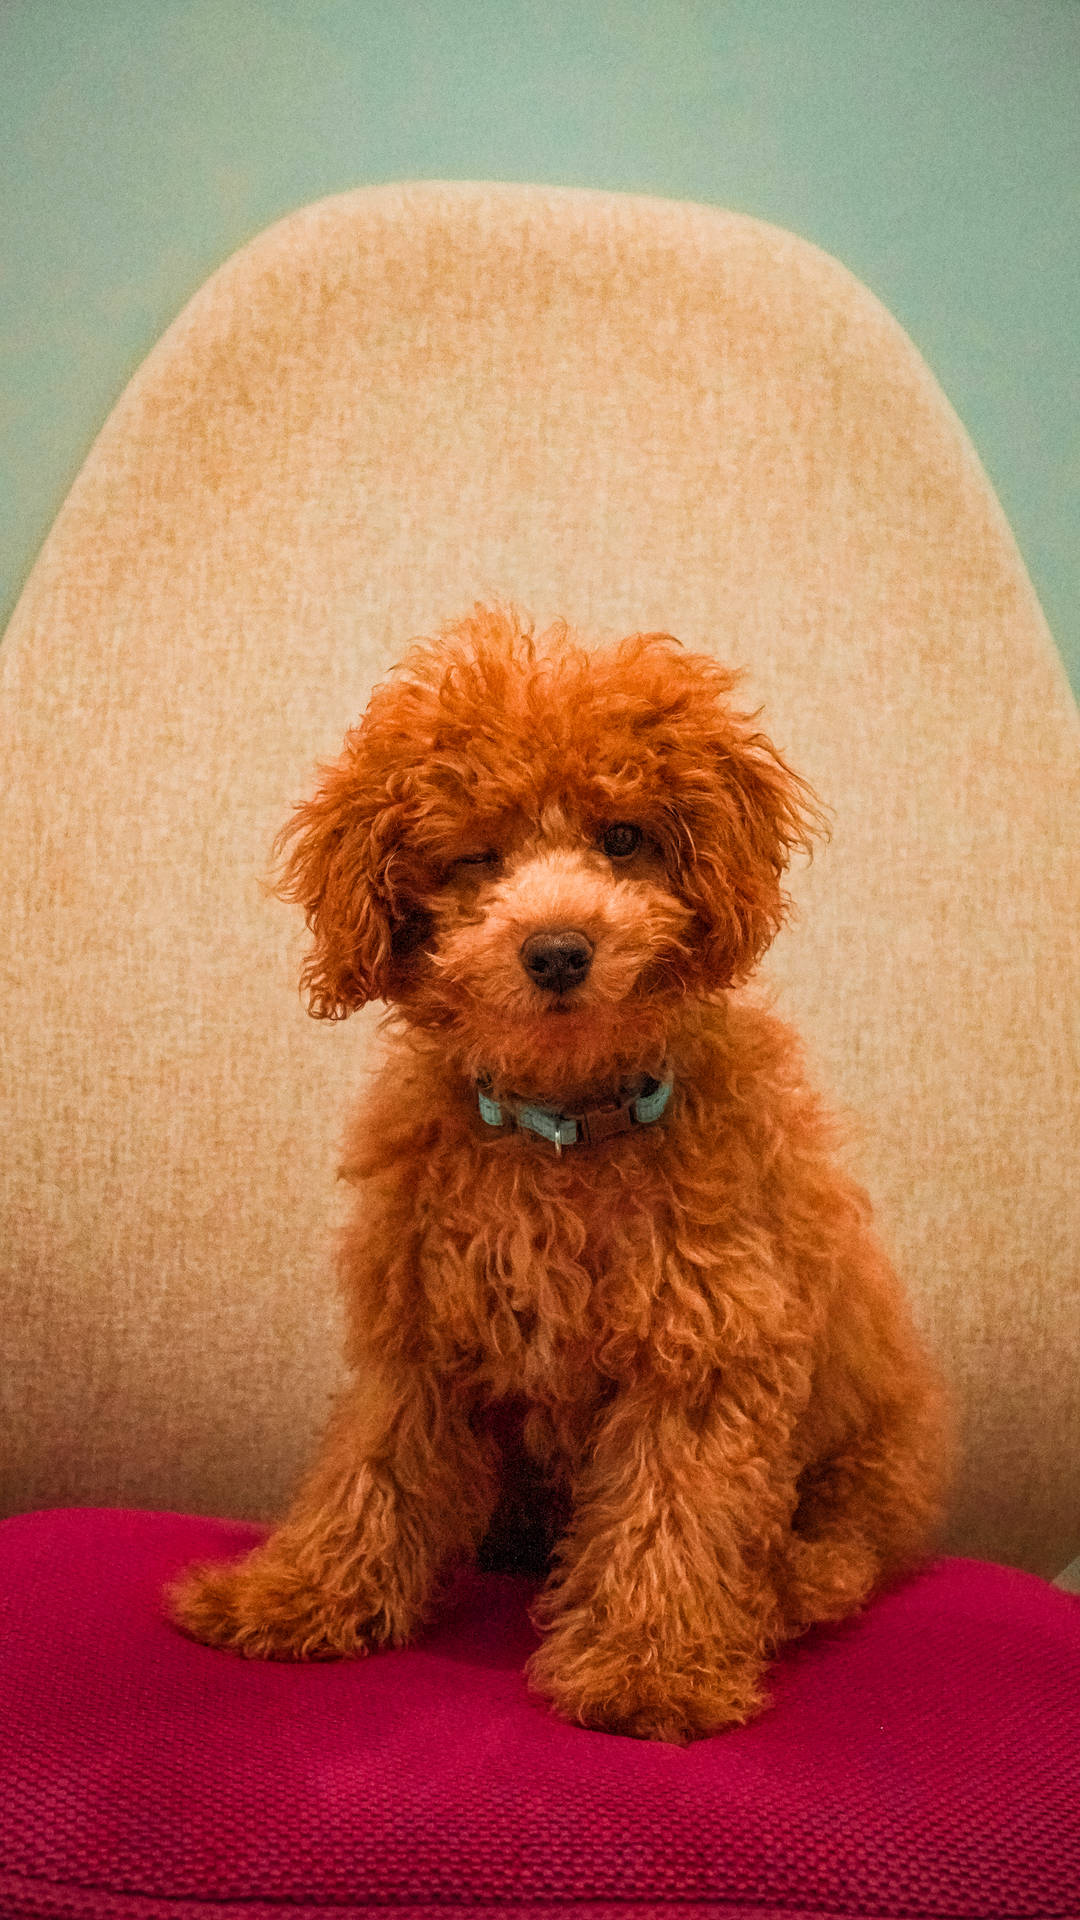 Adorable Toy Poodle Giving A Winky Face